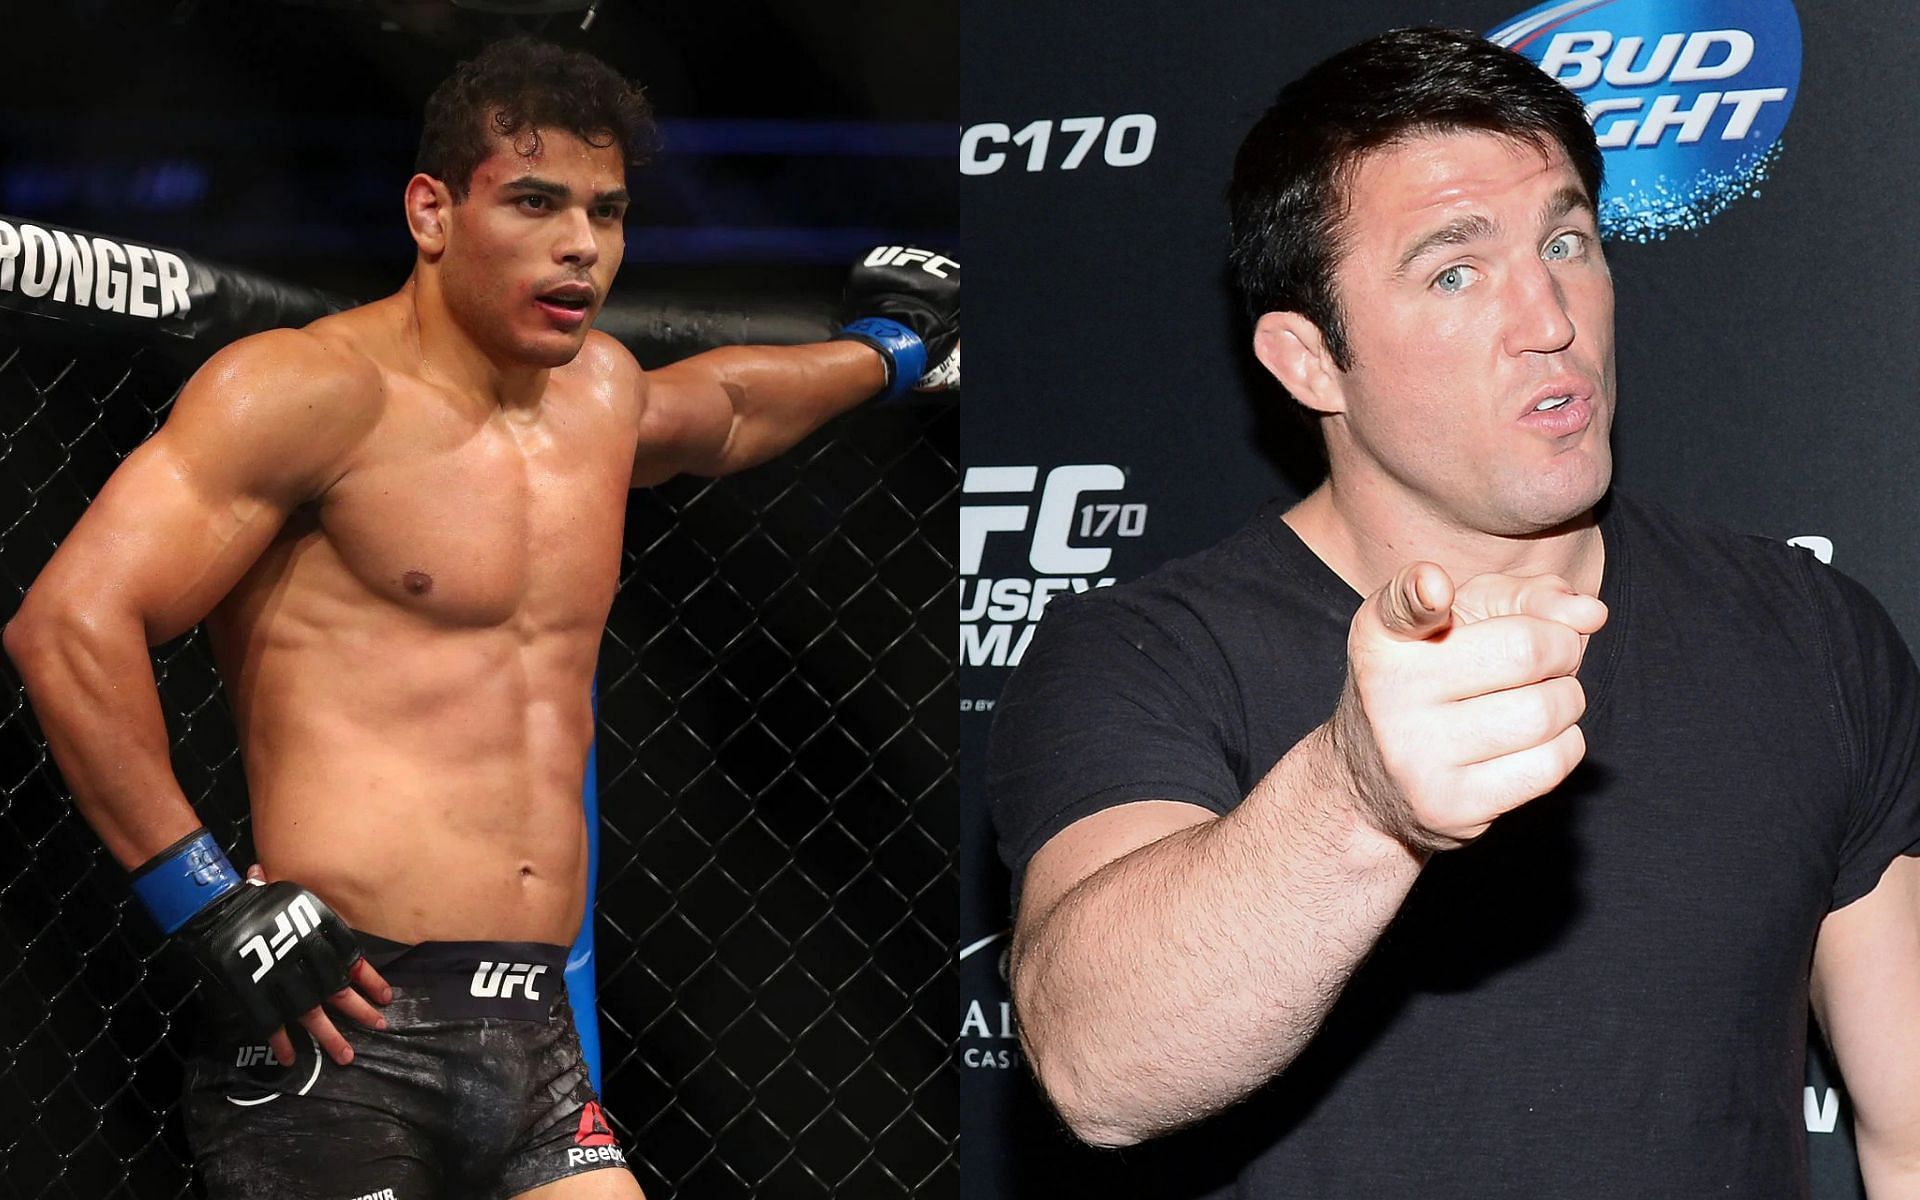 Paulo Costa (Left) and Chael Sonnen (Right) (Images courtesy of Getty)